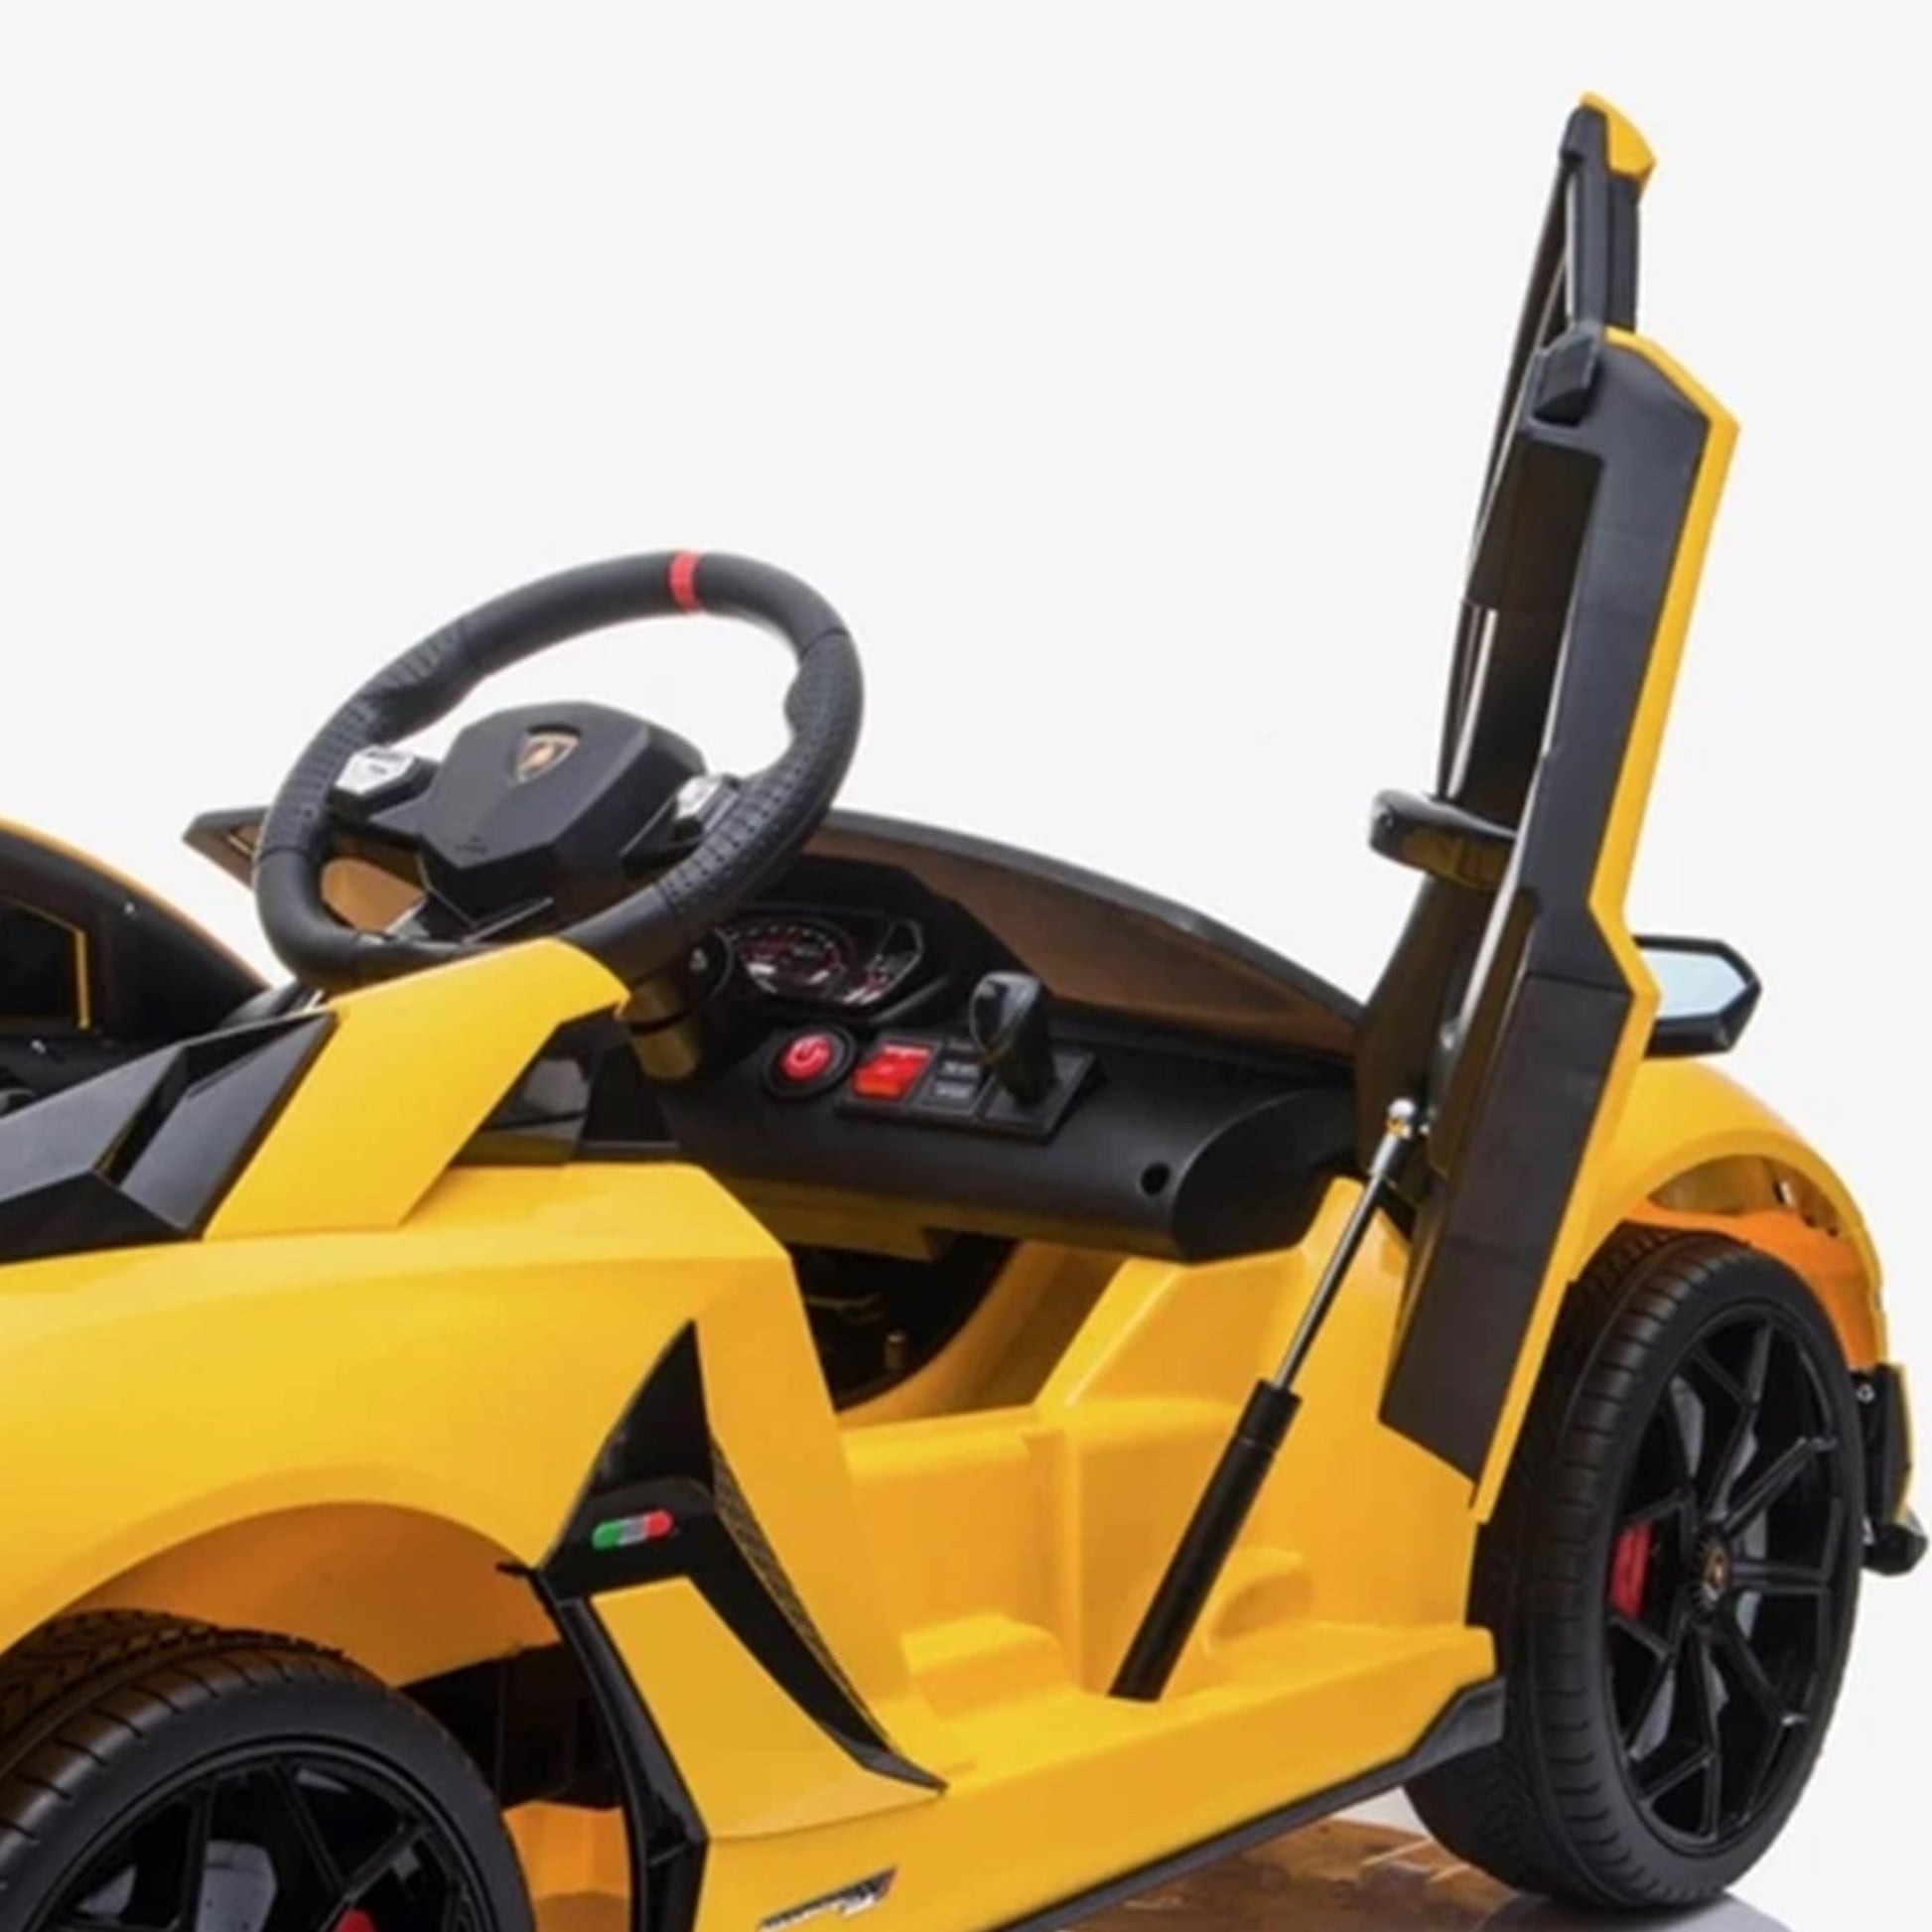 "Yellow LAMBORGHINI SVJ 12 Volt kids electric ride-on with leather seat and parental remote control from KidsCar.co.uk"